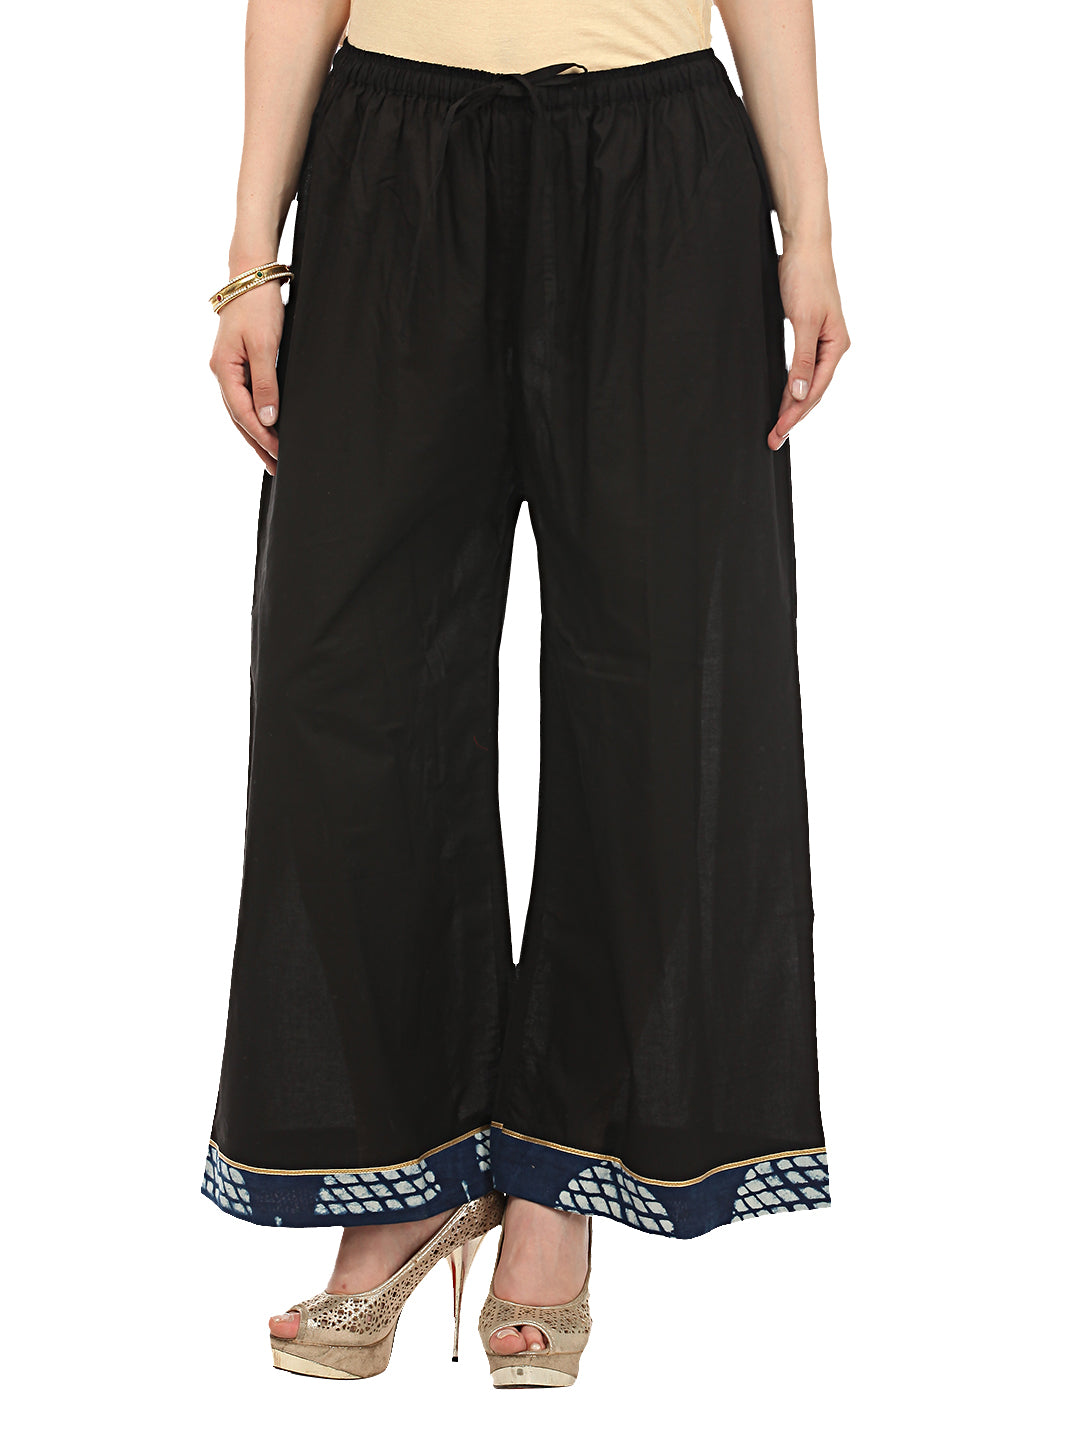 Buy Gray Black Leheria Palazzo Pant Cotton for Best Price, Reviews, Free  Shipping